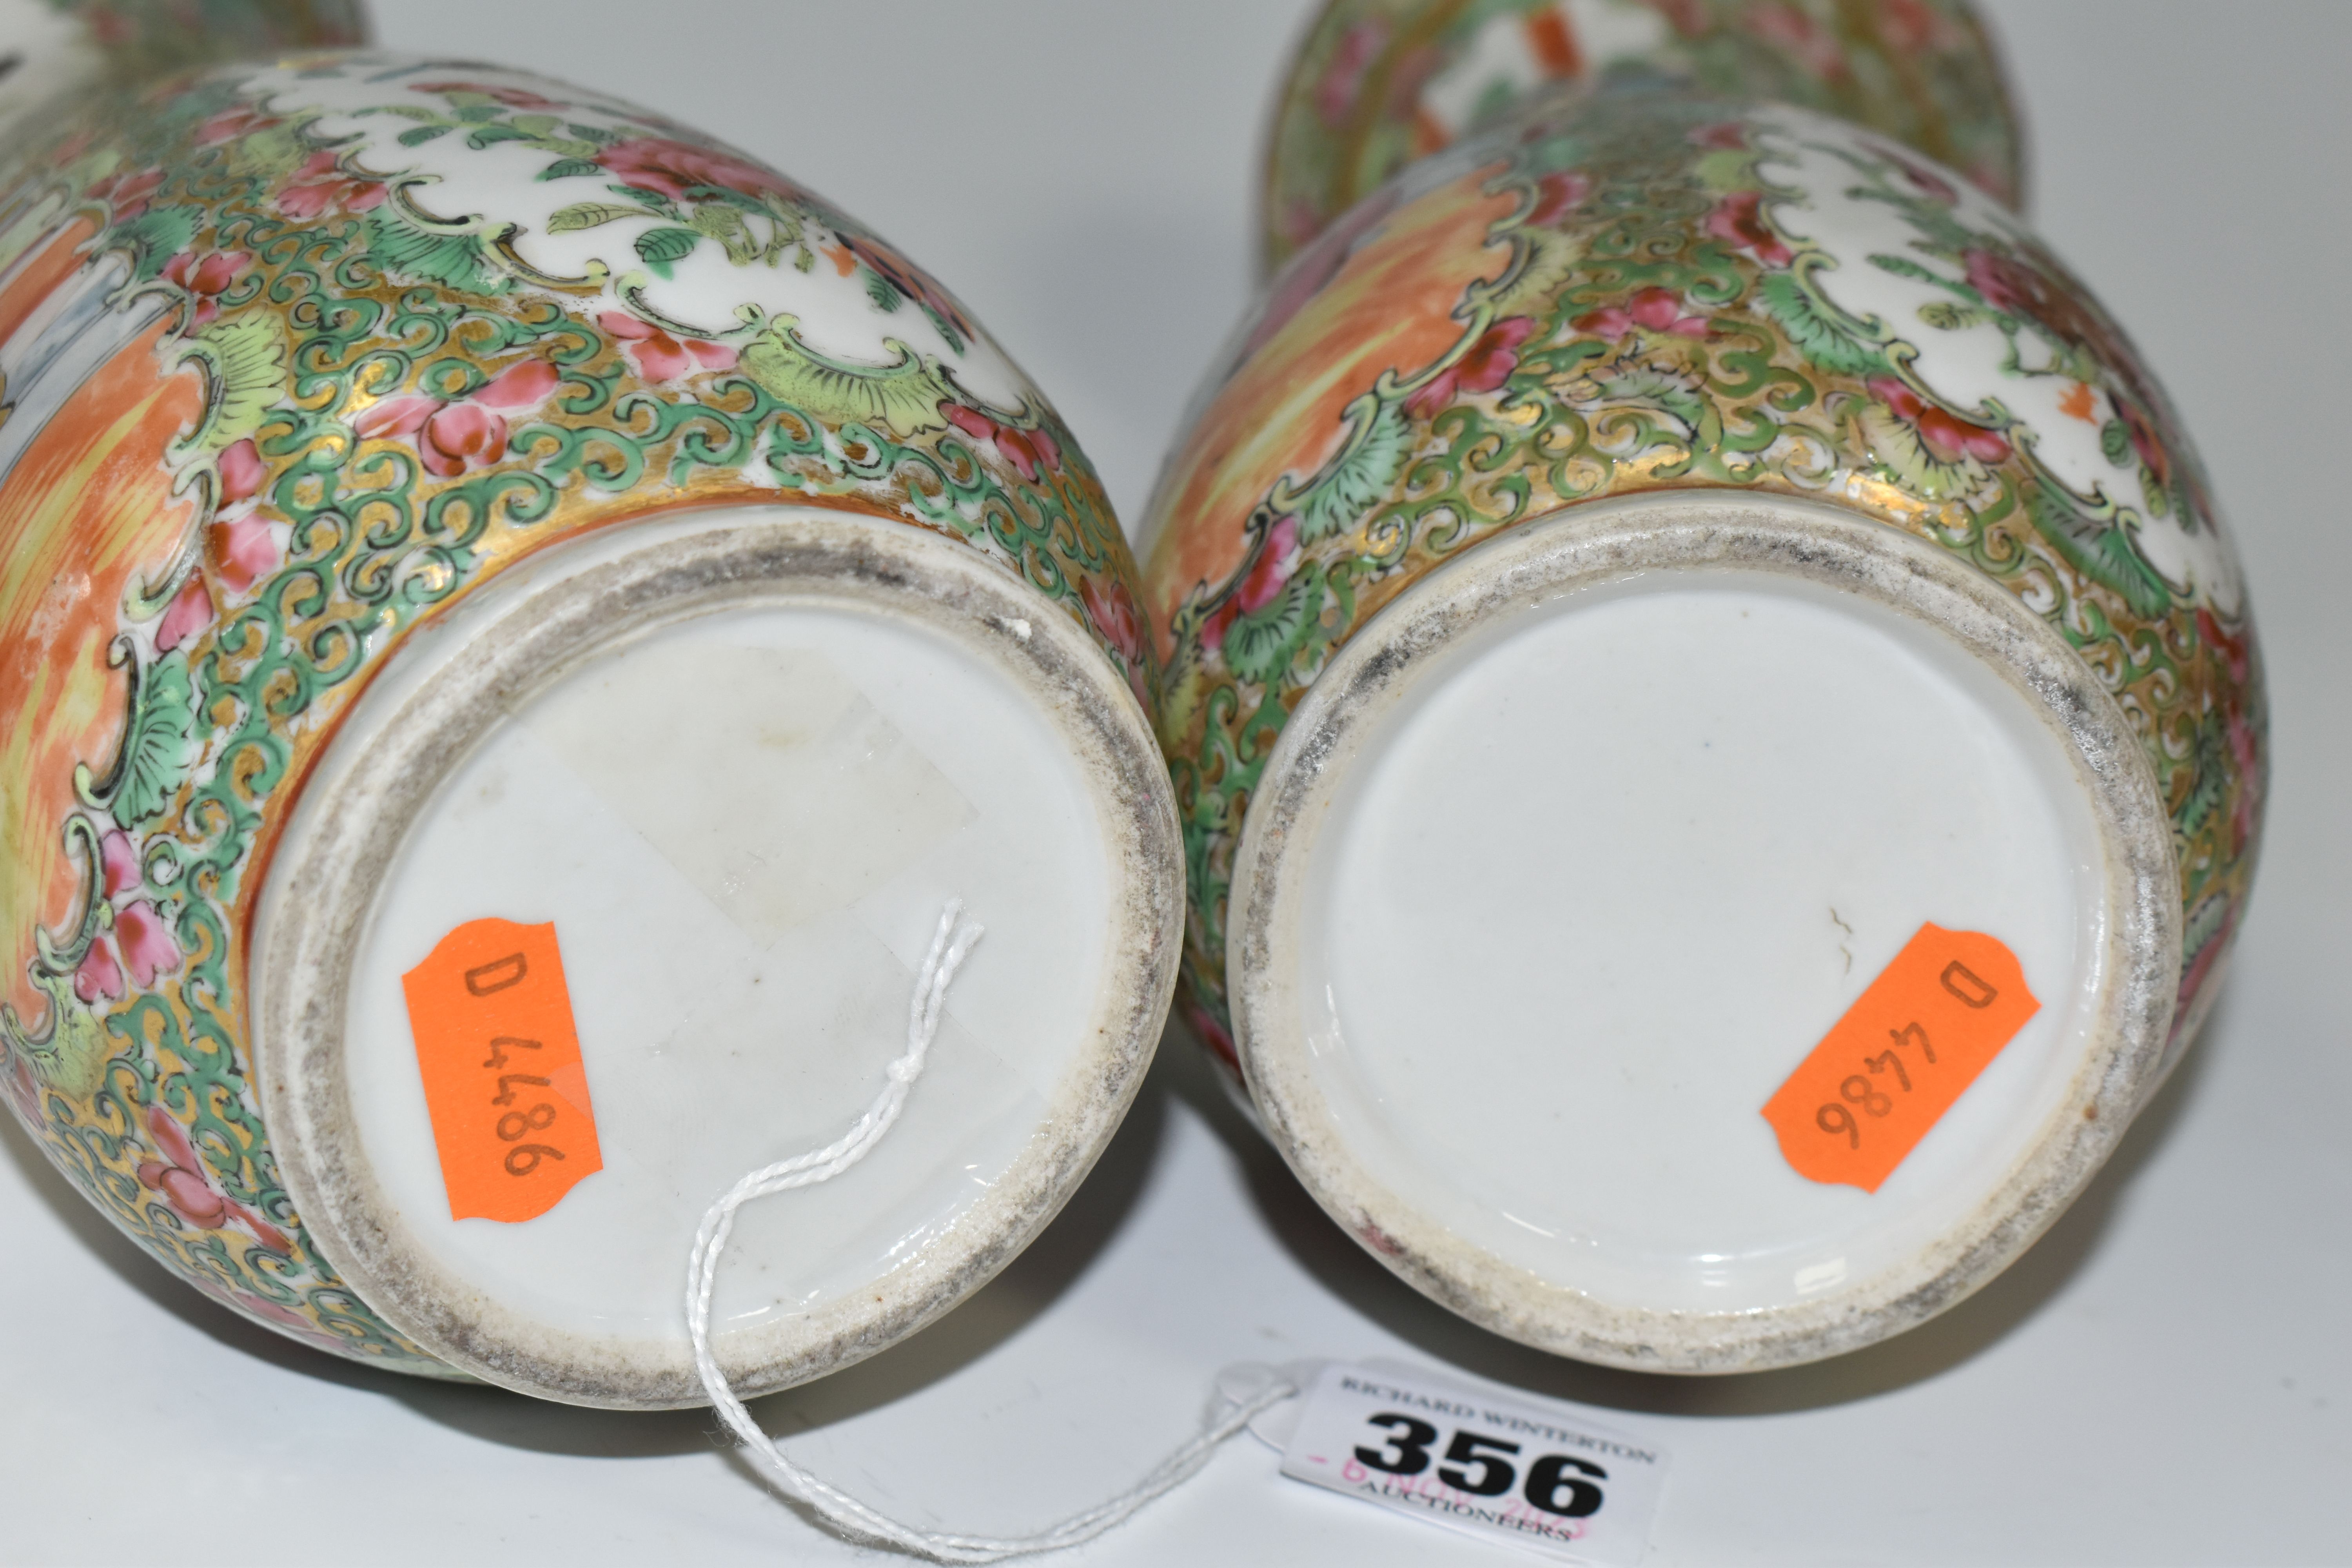 A NEAR PAIR OF LATE 19TH CENTURY CHINESE CANTON FAMILLE ROSE PORCELAIN BALUSTER VASES, with flared - Image 5 of 5